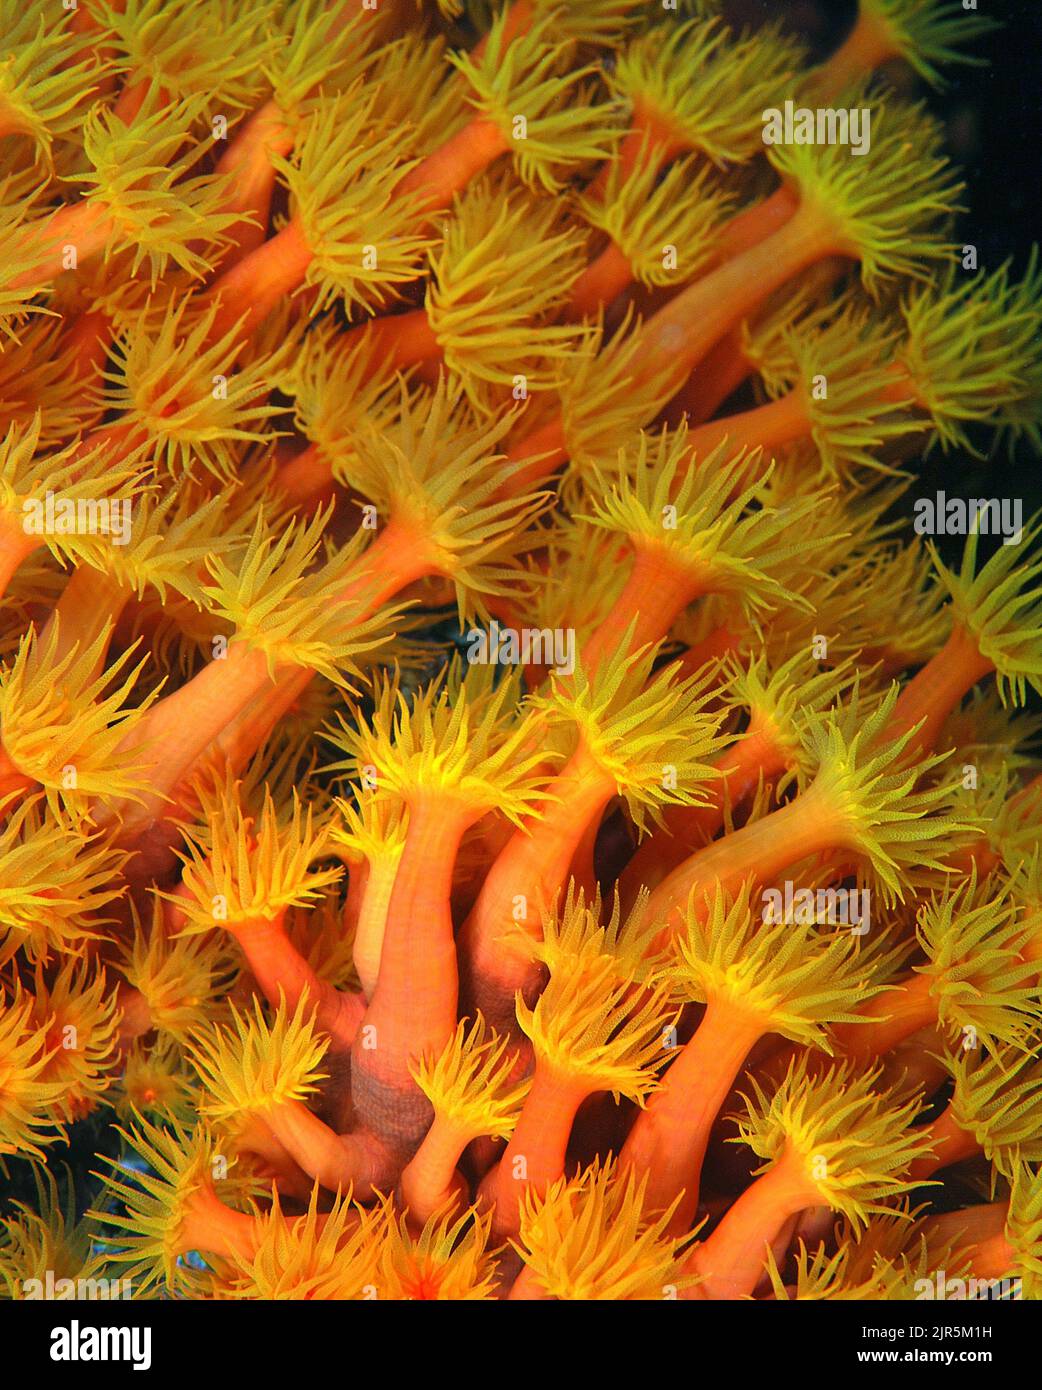 Orange tube coral or Cup coral (Tubastrea coccinea), occur in colonies that share a common skeletal base and tissue, Indonesia, Asia Stock Photo